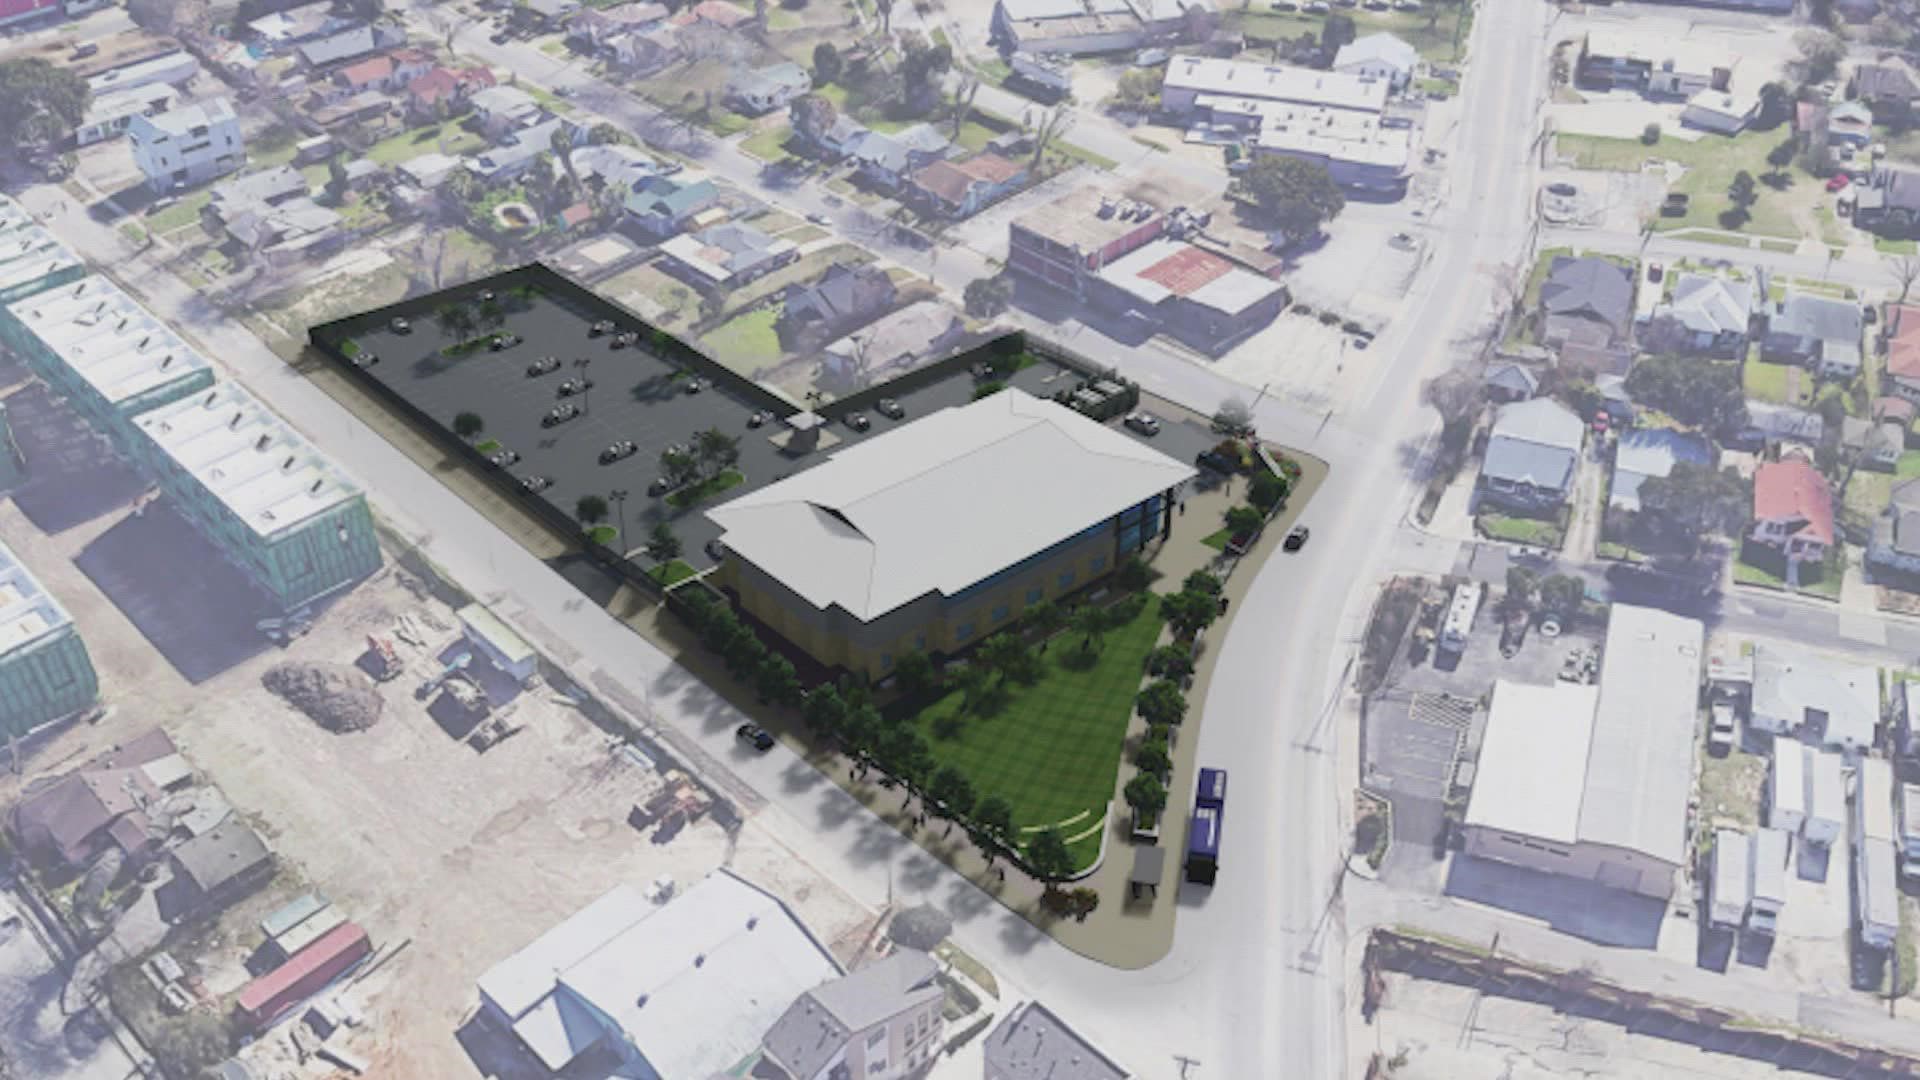 The city of San Antonio recently filed construction paperwork with the state indicating work on a new police substation will begin in February.